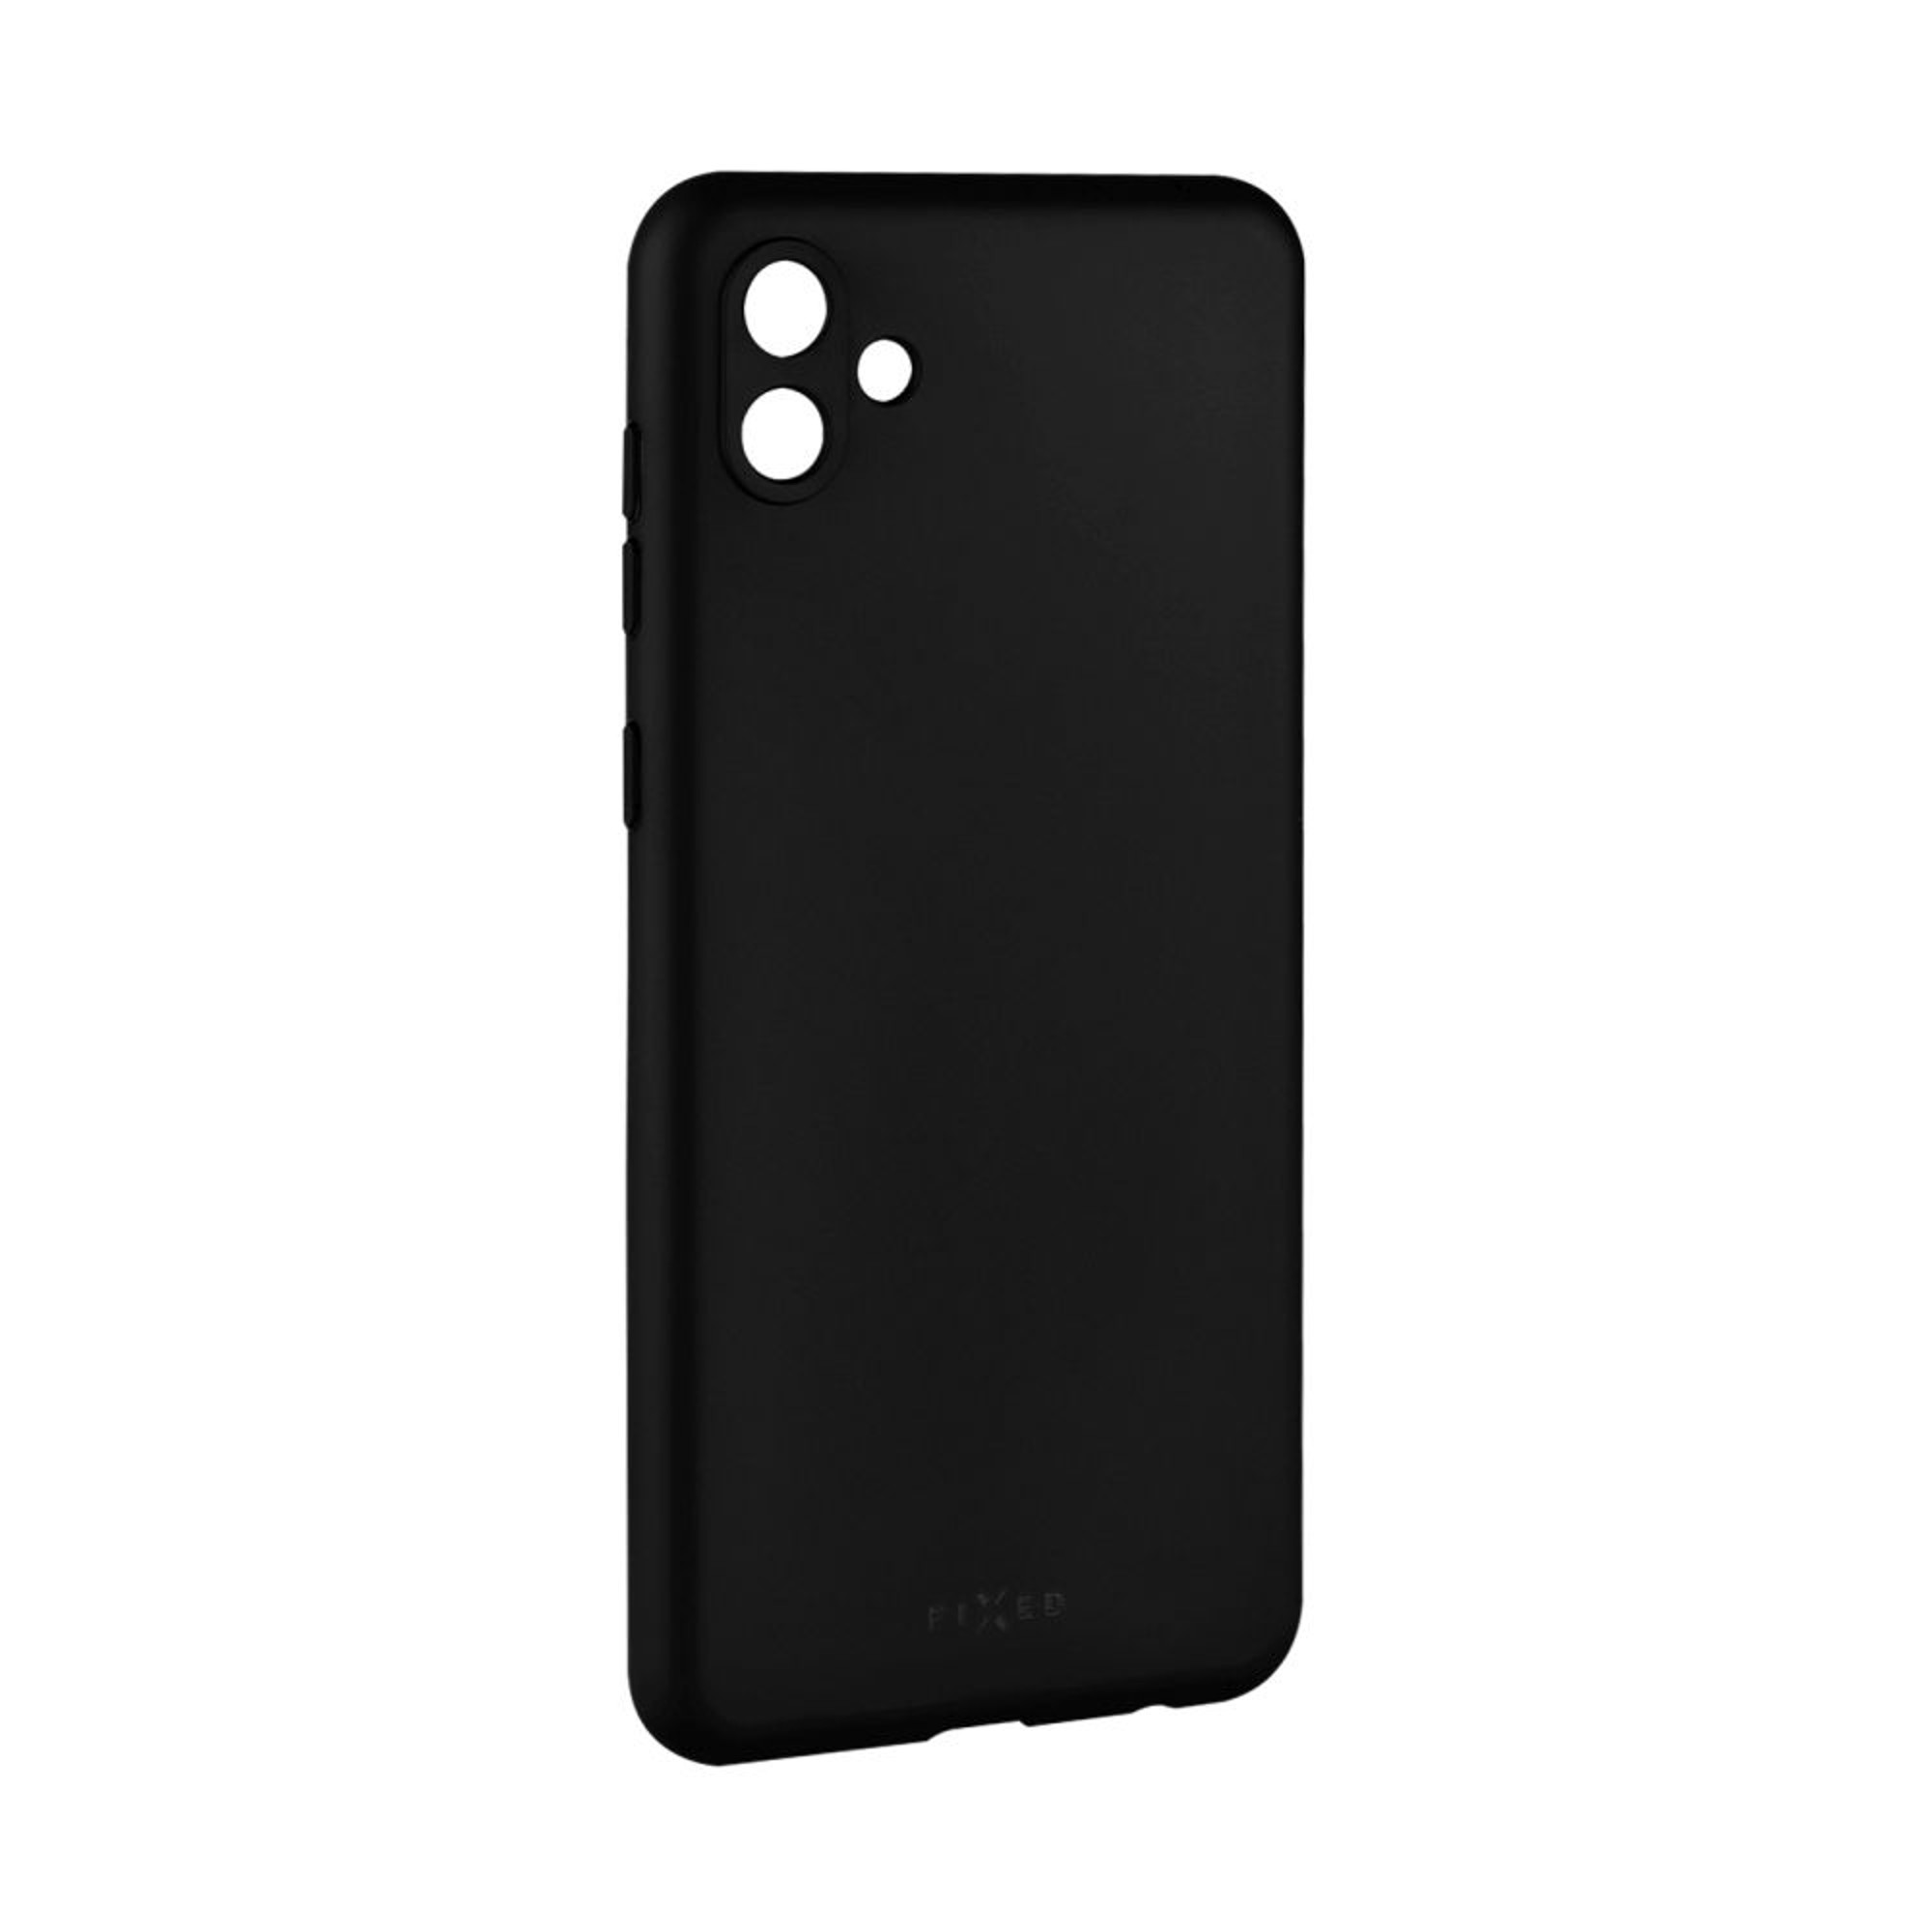 Story Backcover, FIXST-1090-BK, FIXED Schwarz Soft-Touch A04, Galaxy Samsung,